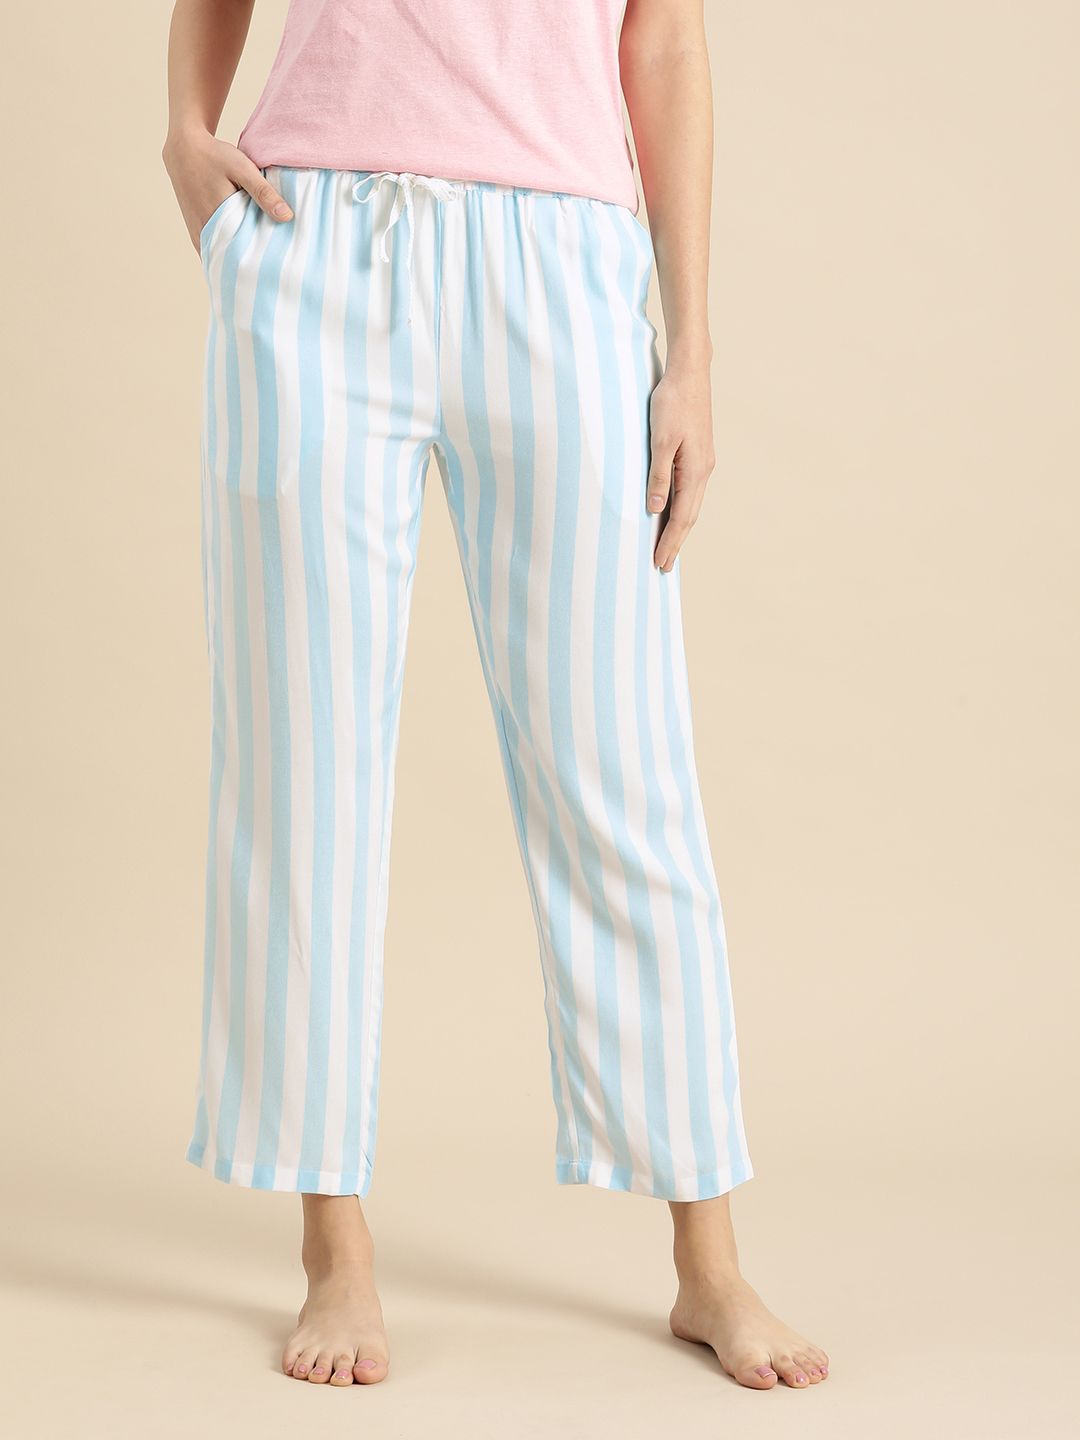 Dreamz by Pantaloons Women Blue & White Mid-Rise Striped Viscose Rayon Lounge Pants Price in India